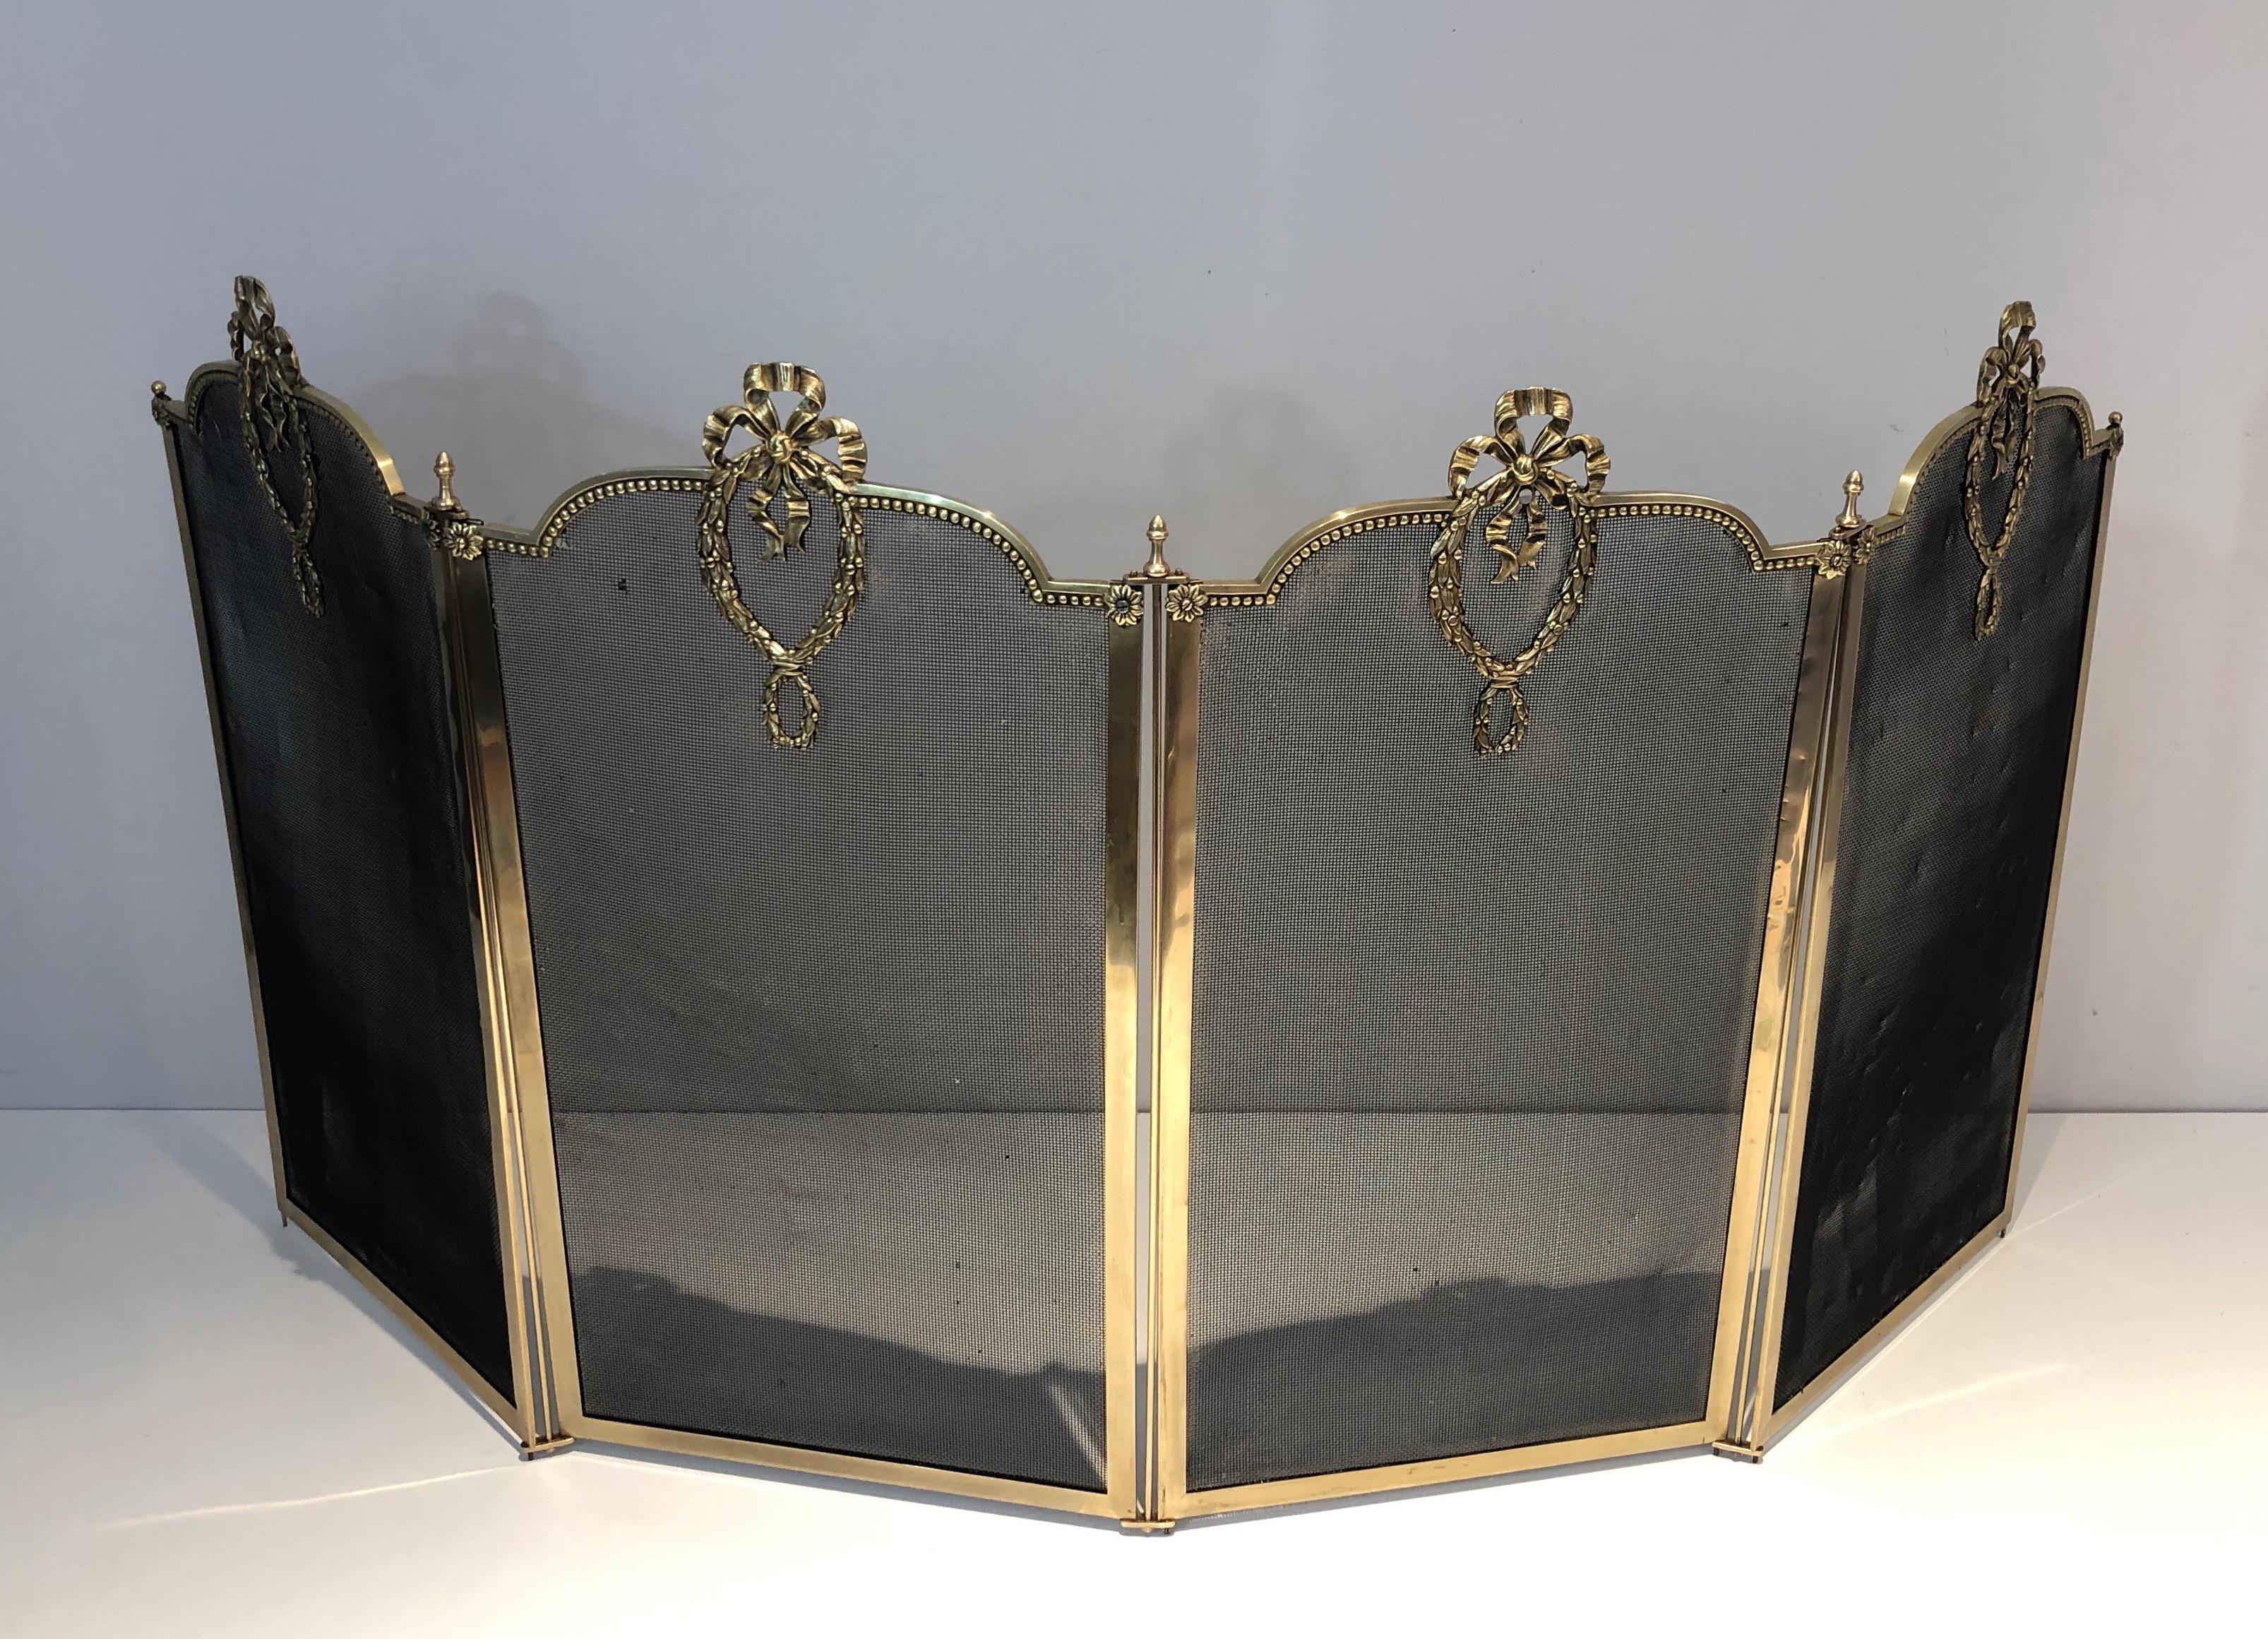 This very nice and decorative Louis the 16th style 4 panels folding fireplace screen is made of brass and grilling. This firewall is decorated with bows, ribbons and garlands. This is a  French work, circa 1900.